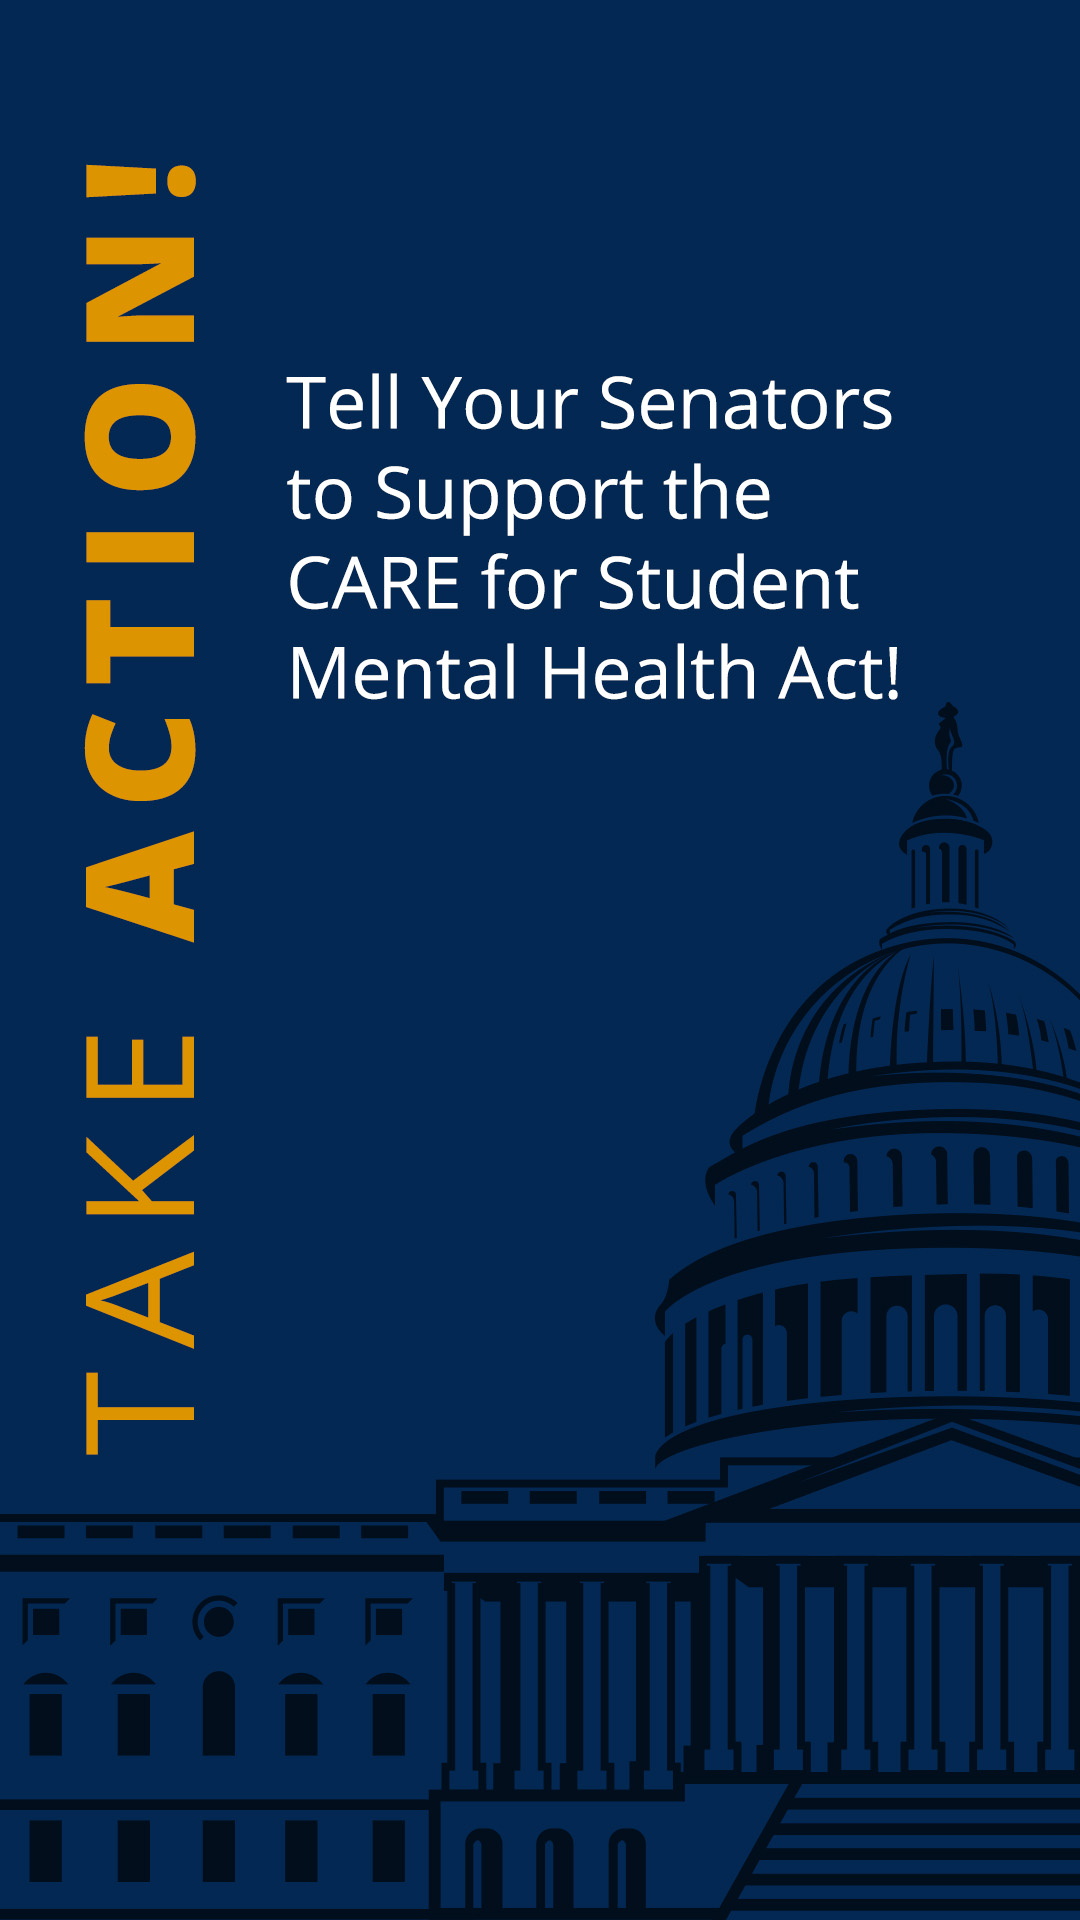 Take action: tell your senators to support the CARE Act